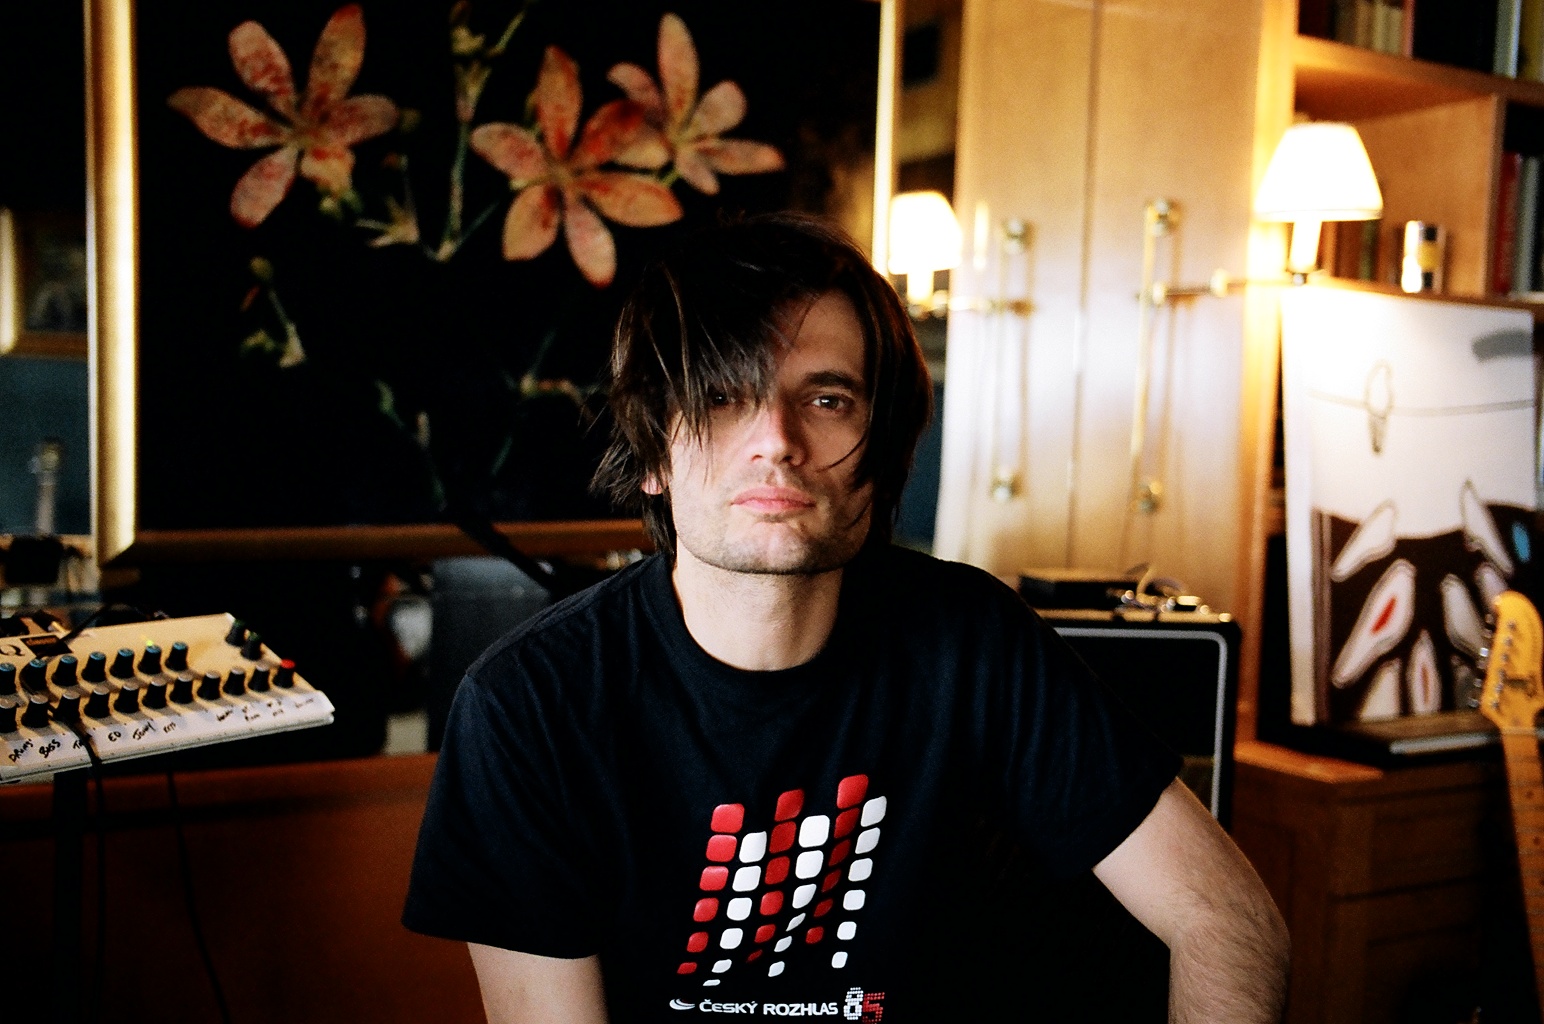 Preview - Jonny Greenwood and LCO, 23rd February - Wapping Hydraulic Power Station 1